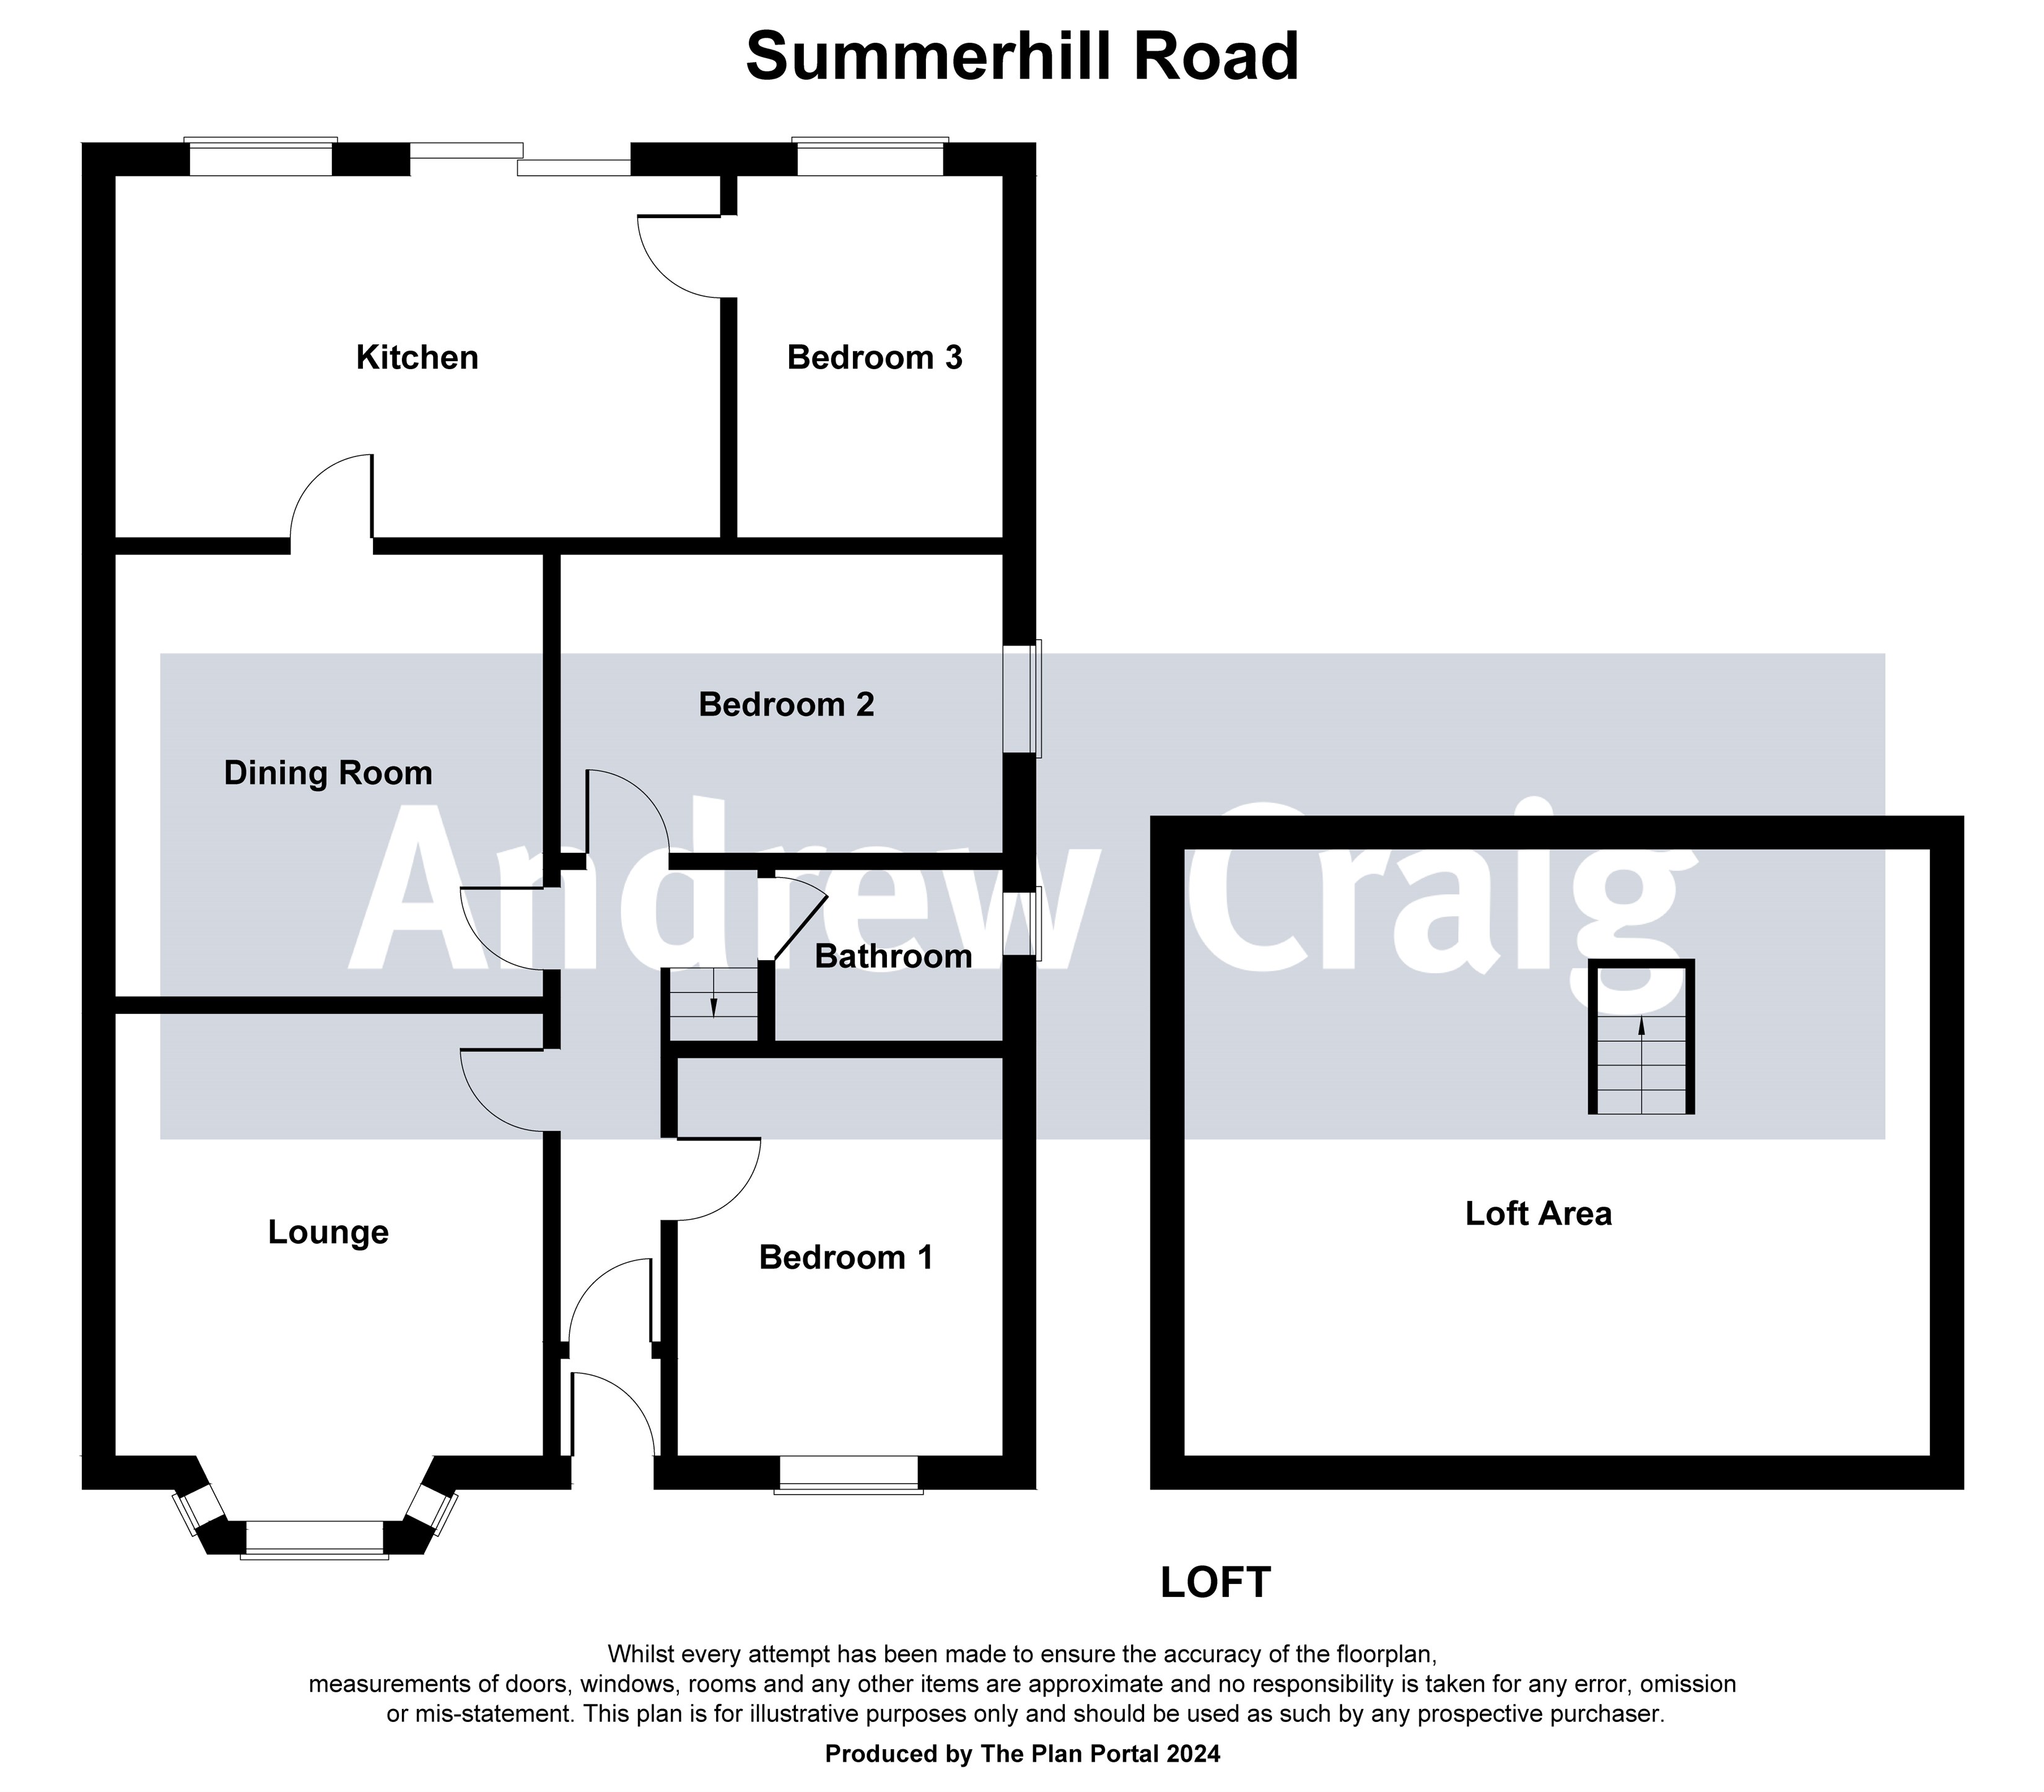 3 bed semi-detached bungalow for sale in Summerhill Road, South Shields - Property floorplan